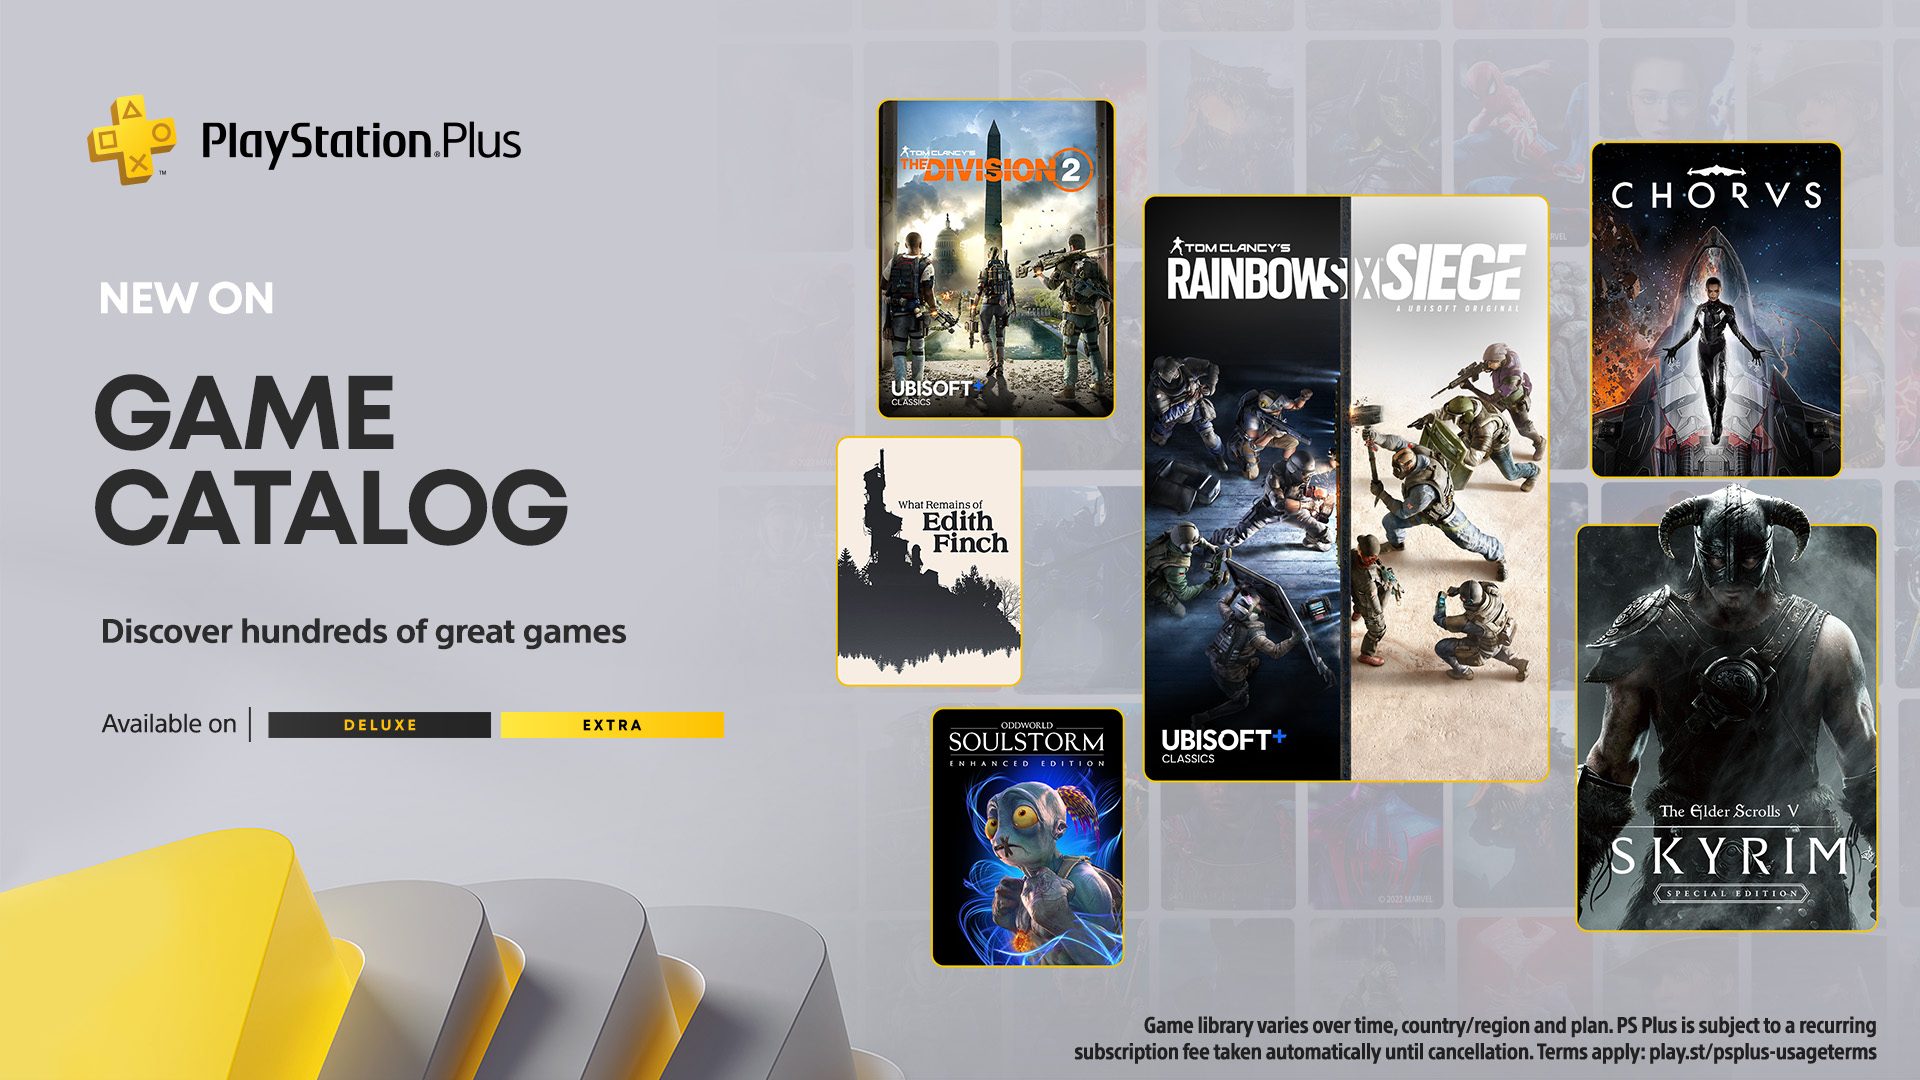 For Southeast Asia) Your guide to the all-new PlayStation Plus – PlayStation .Blog